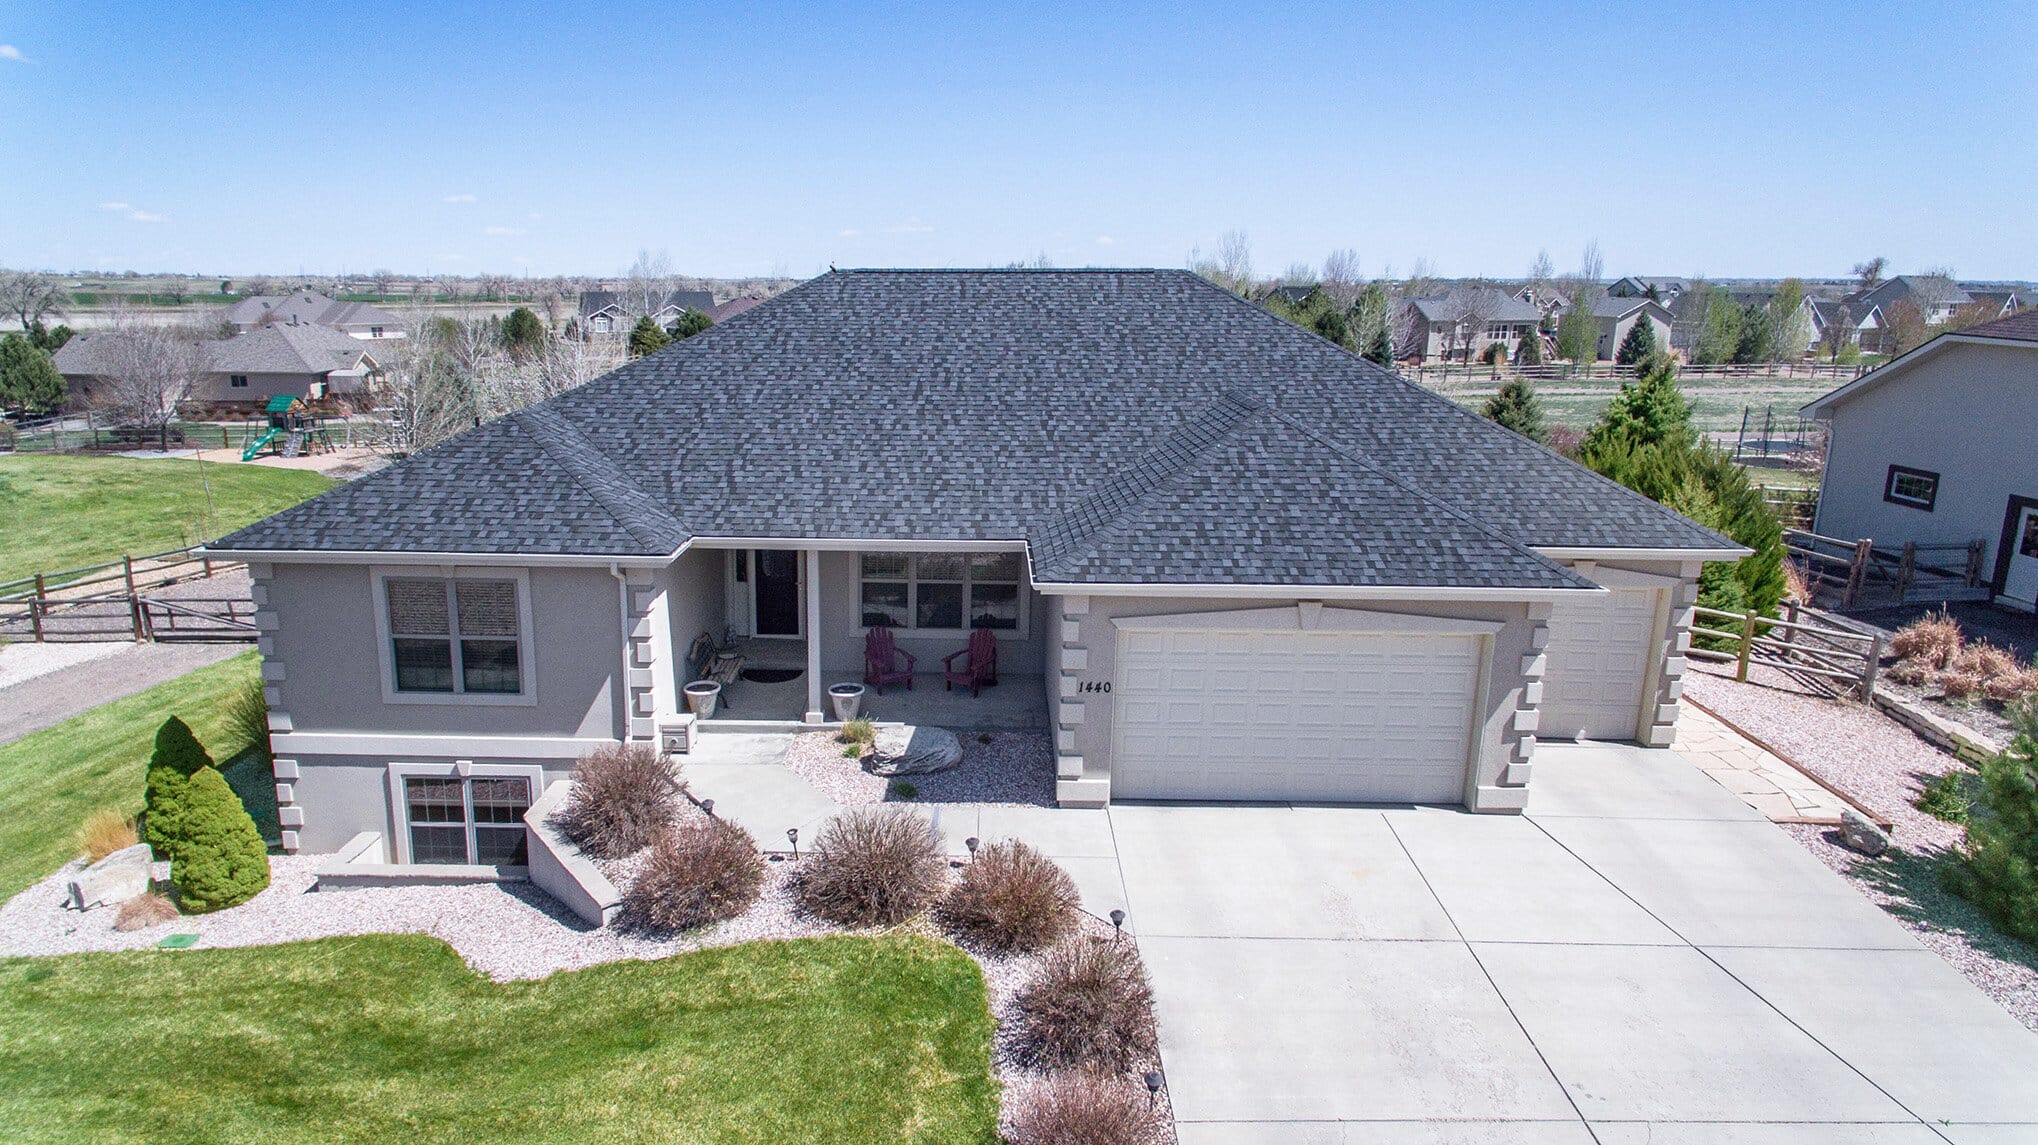 Aerial view of a home with a dark gray roof and white accents